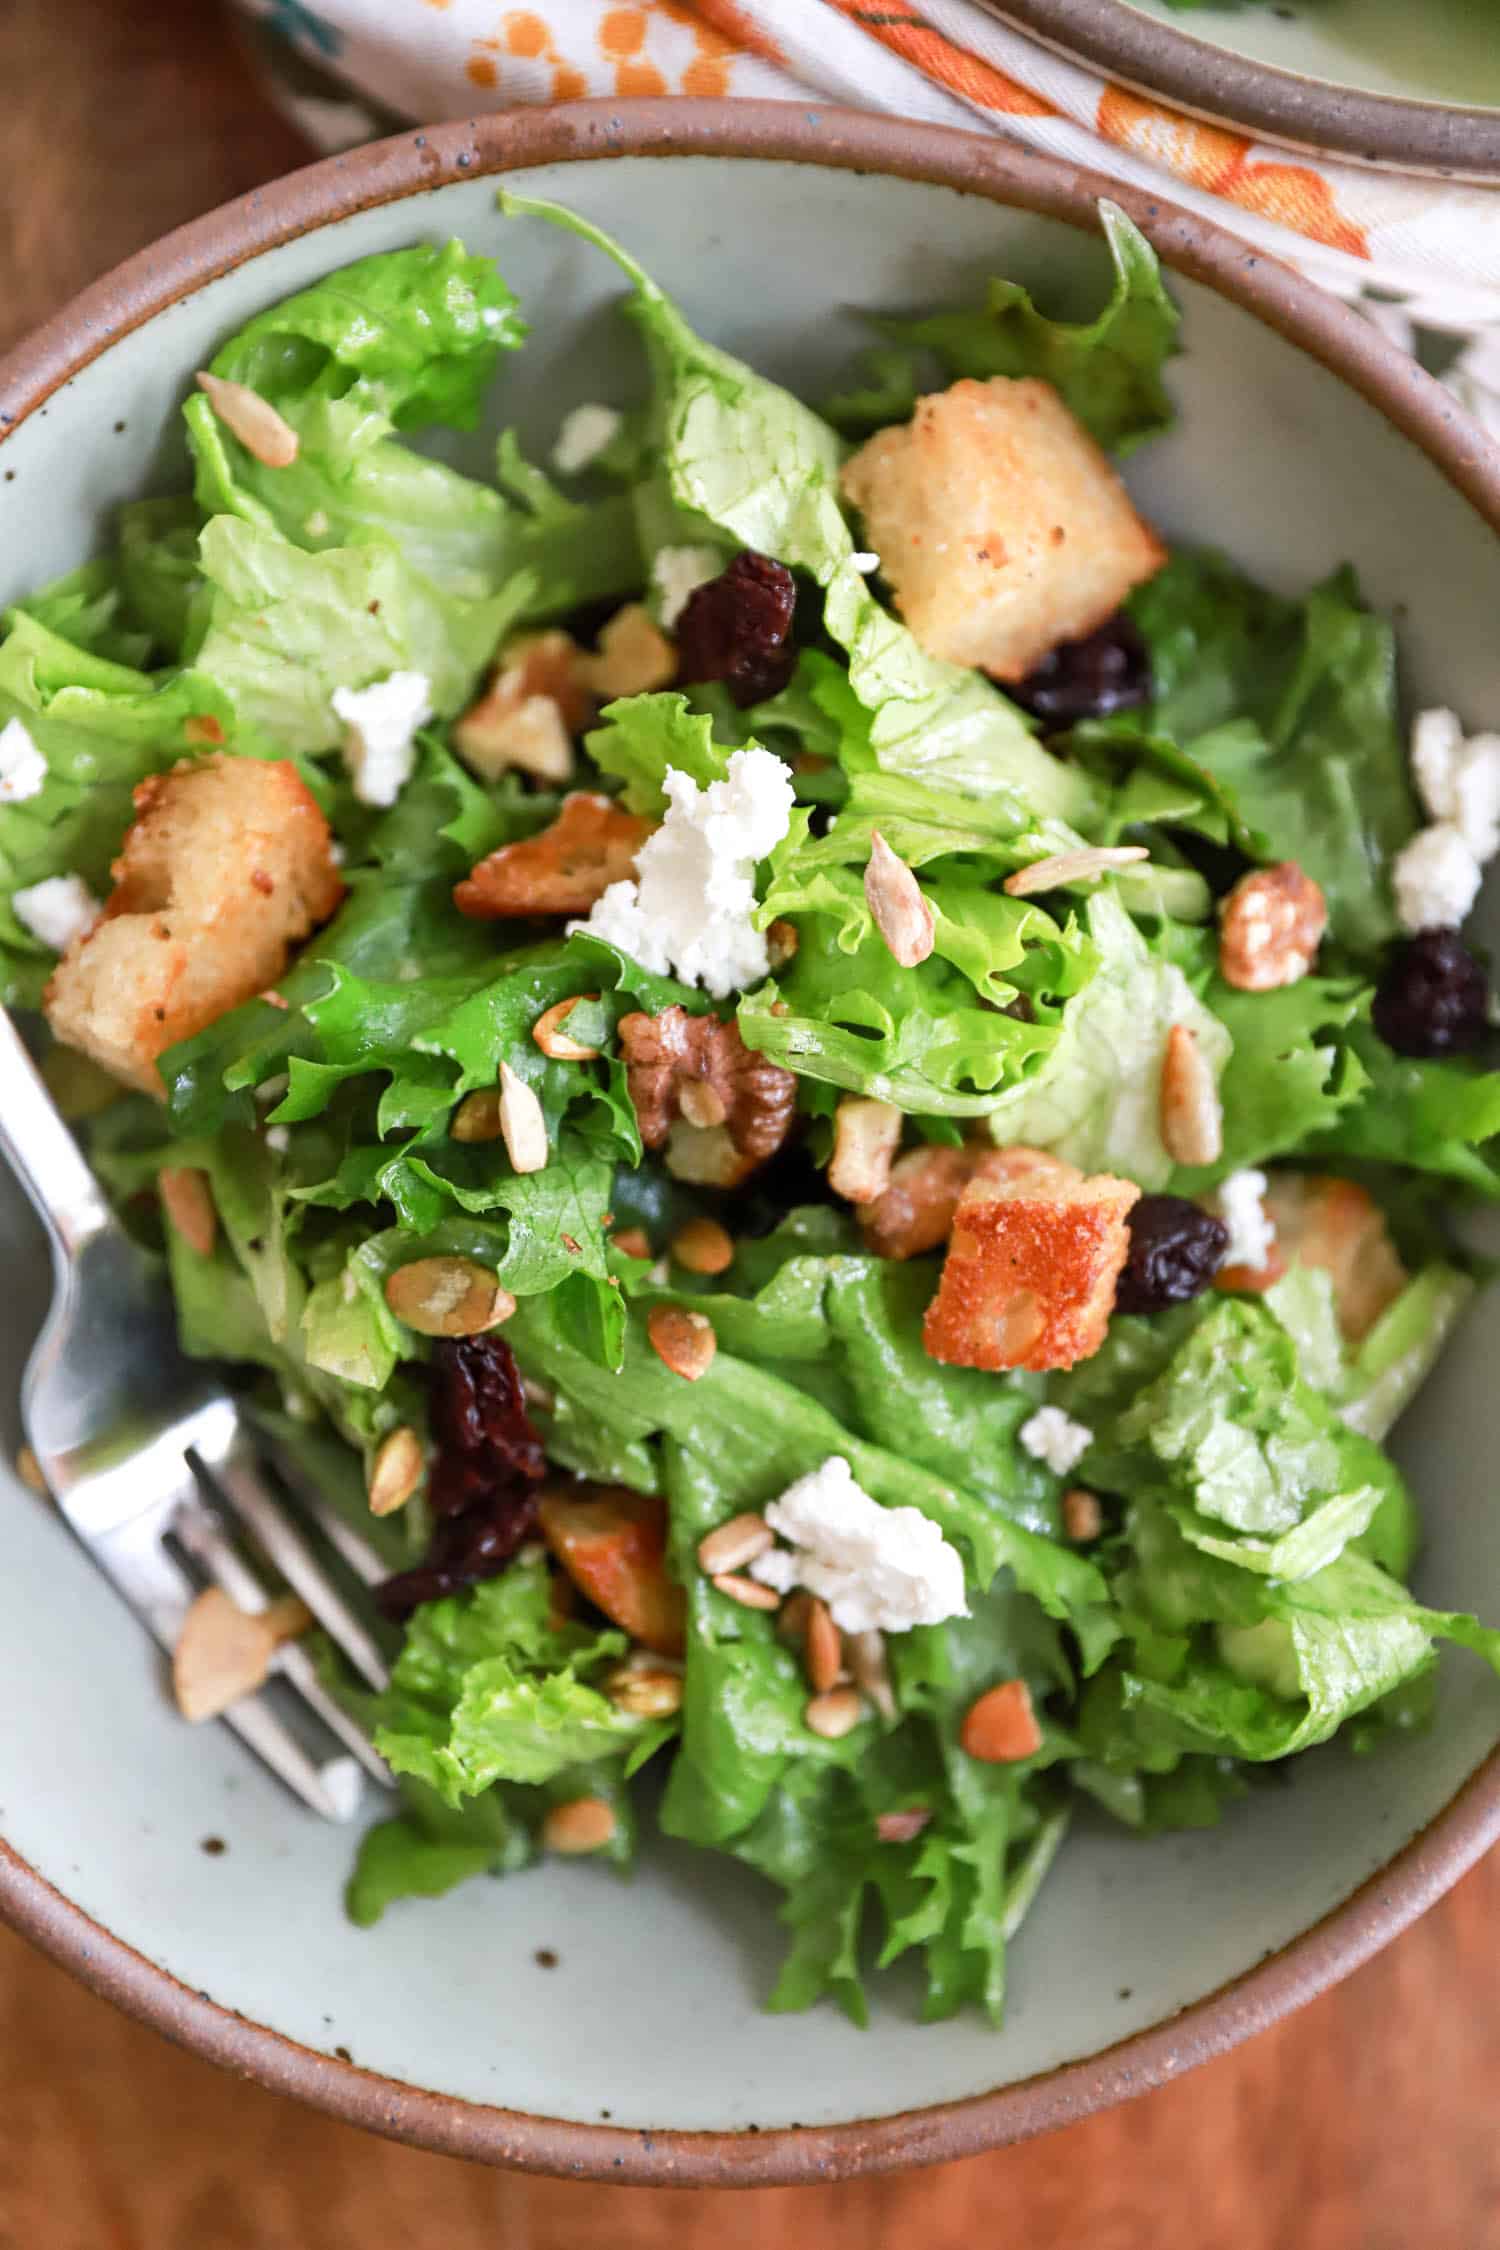 Gray bowl of salad with croutons and goat cheese.